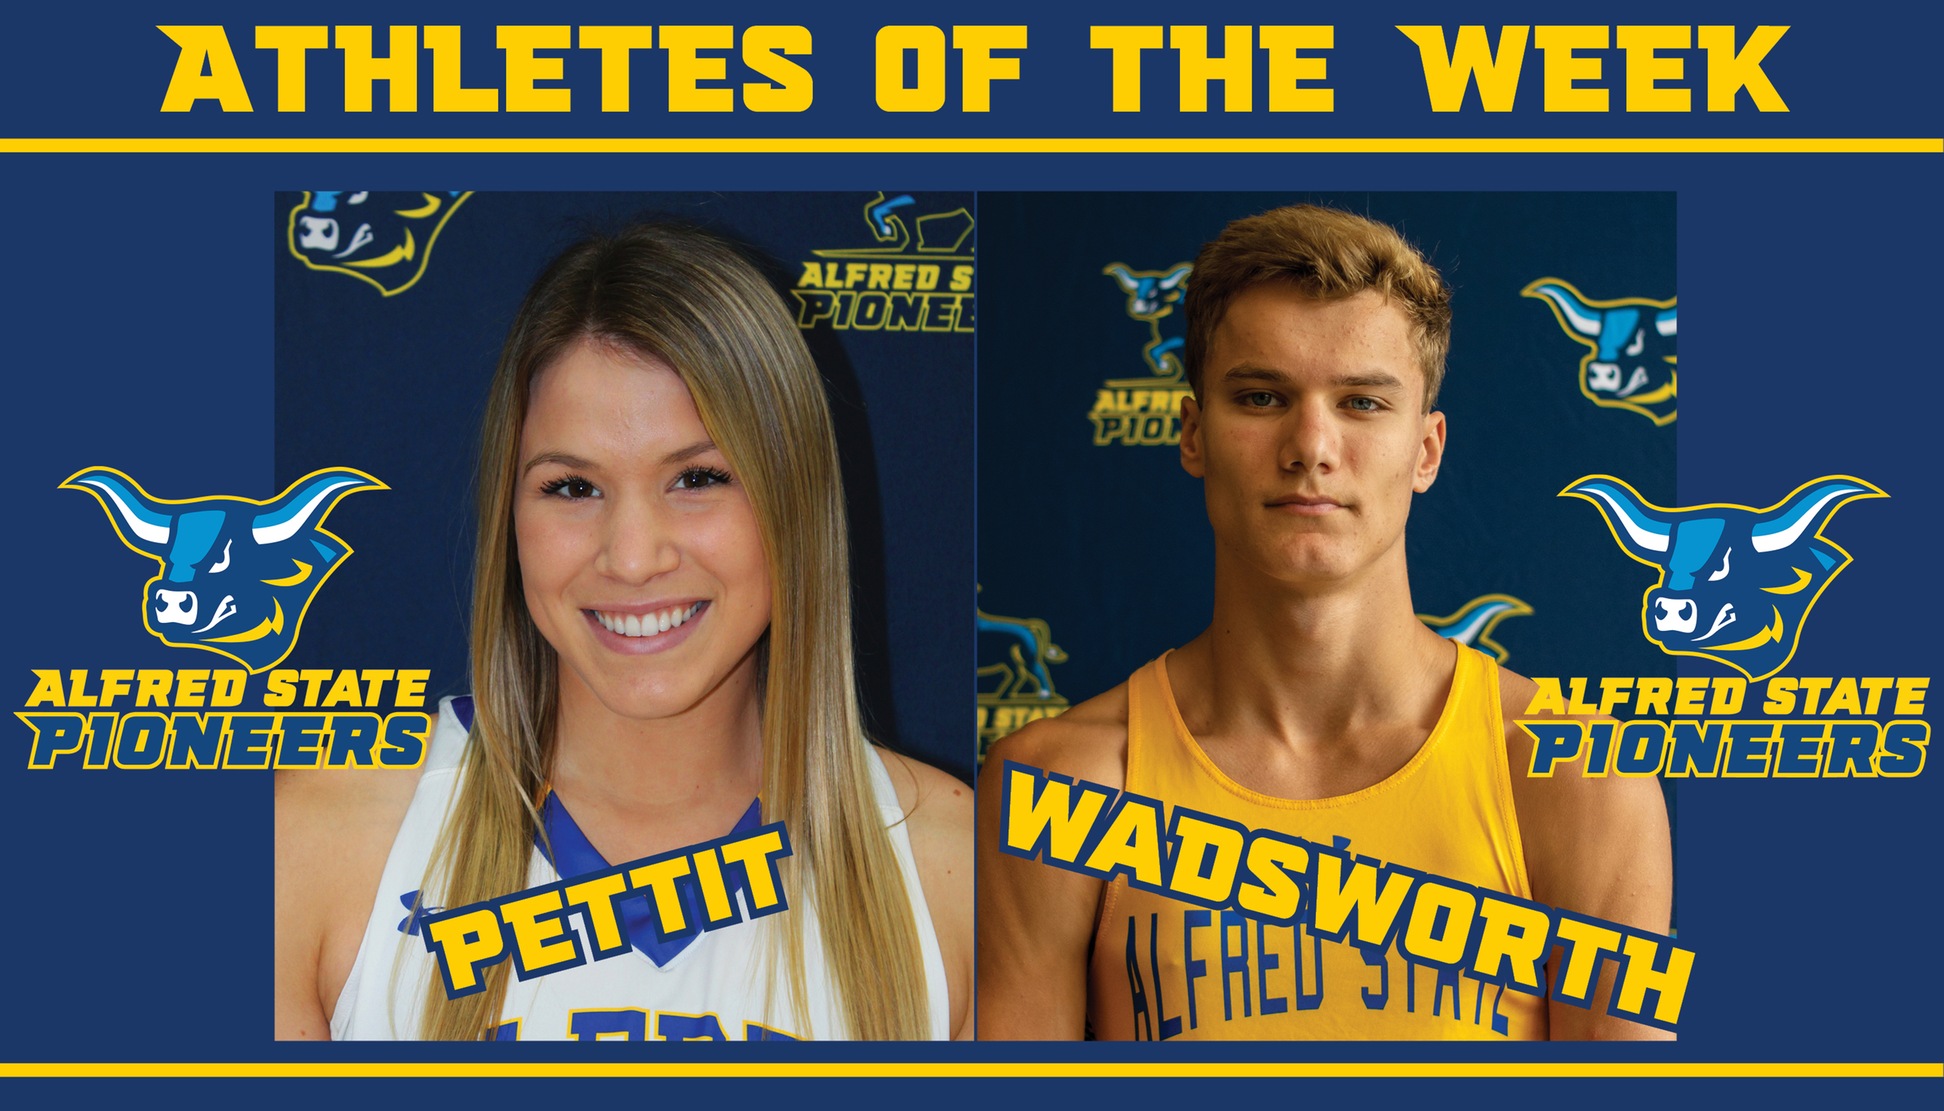 Jordyn Pettit and Jacob Wadsworth repeat as Athletes of the Week